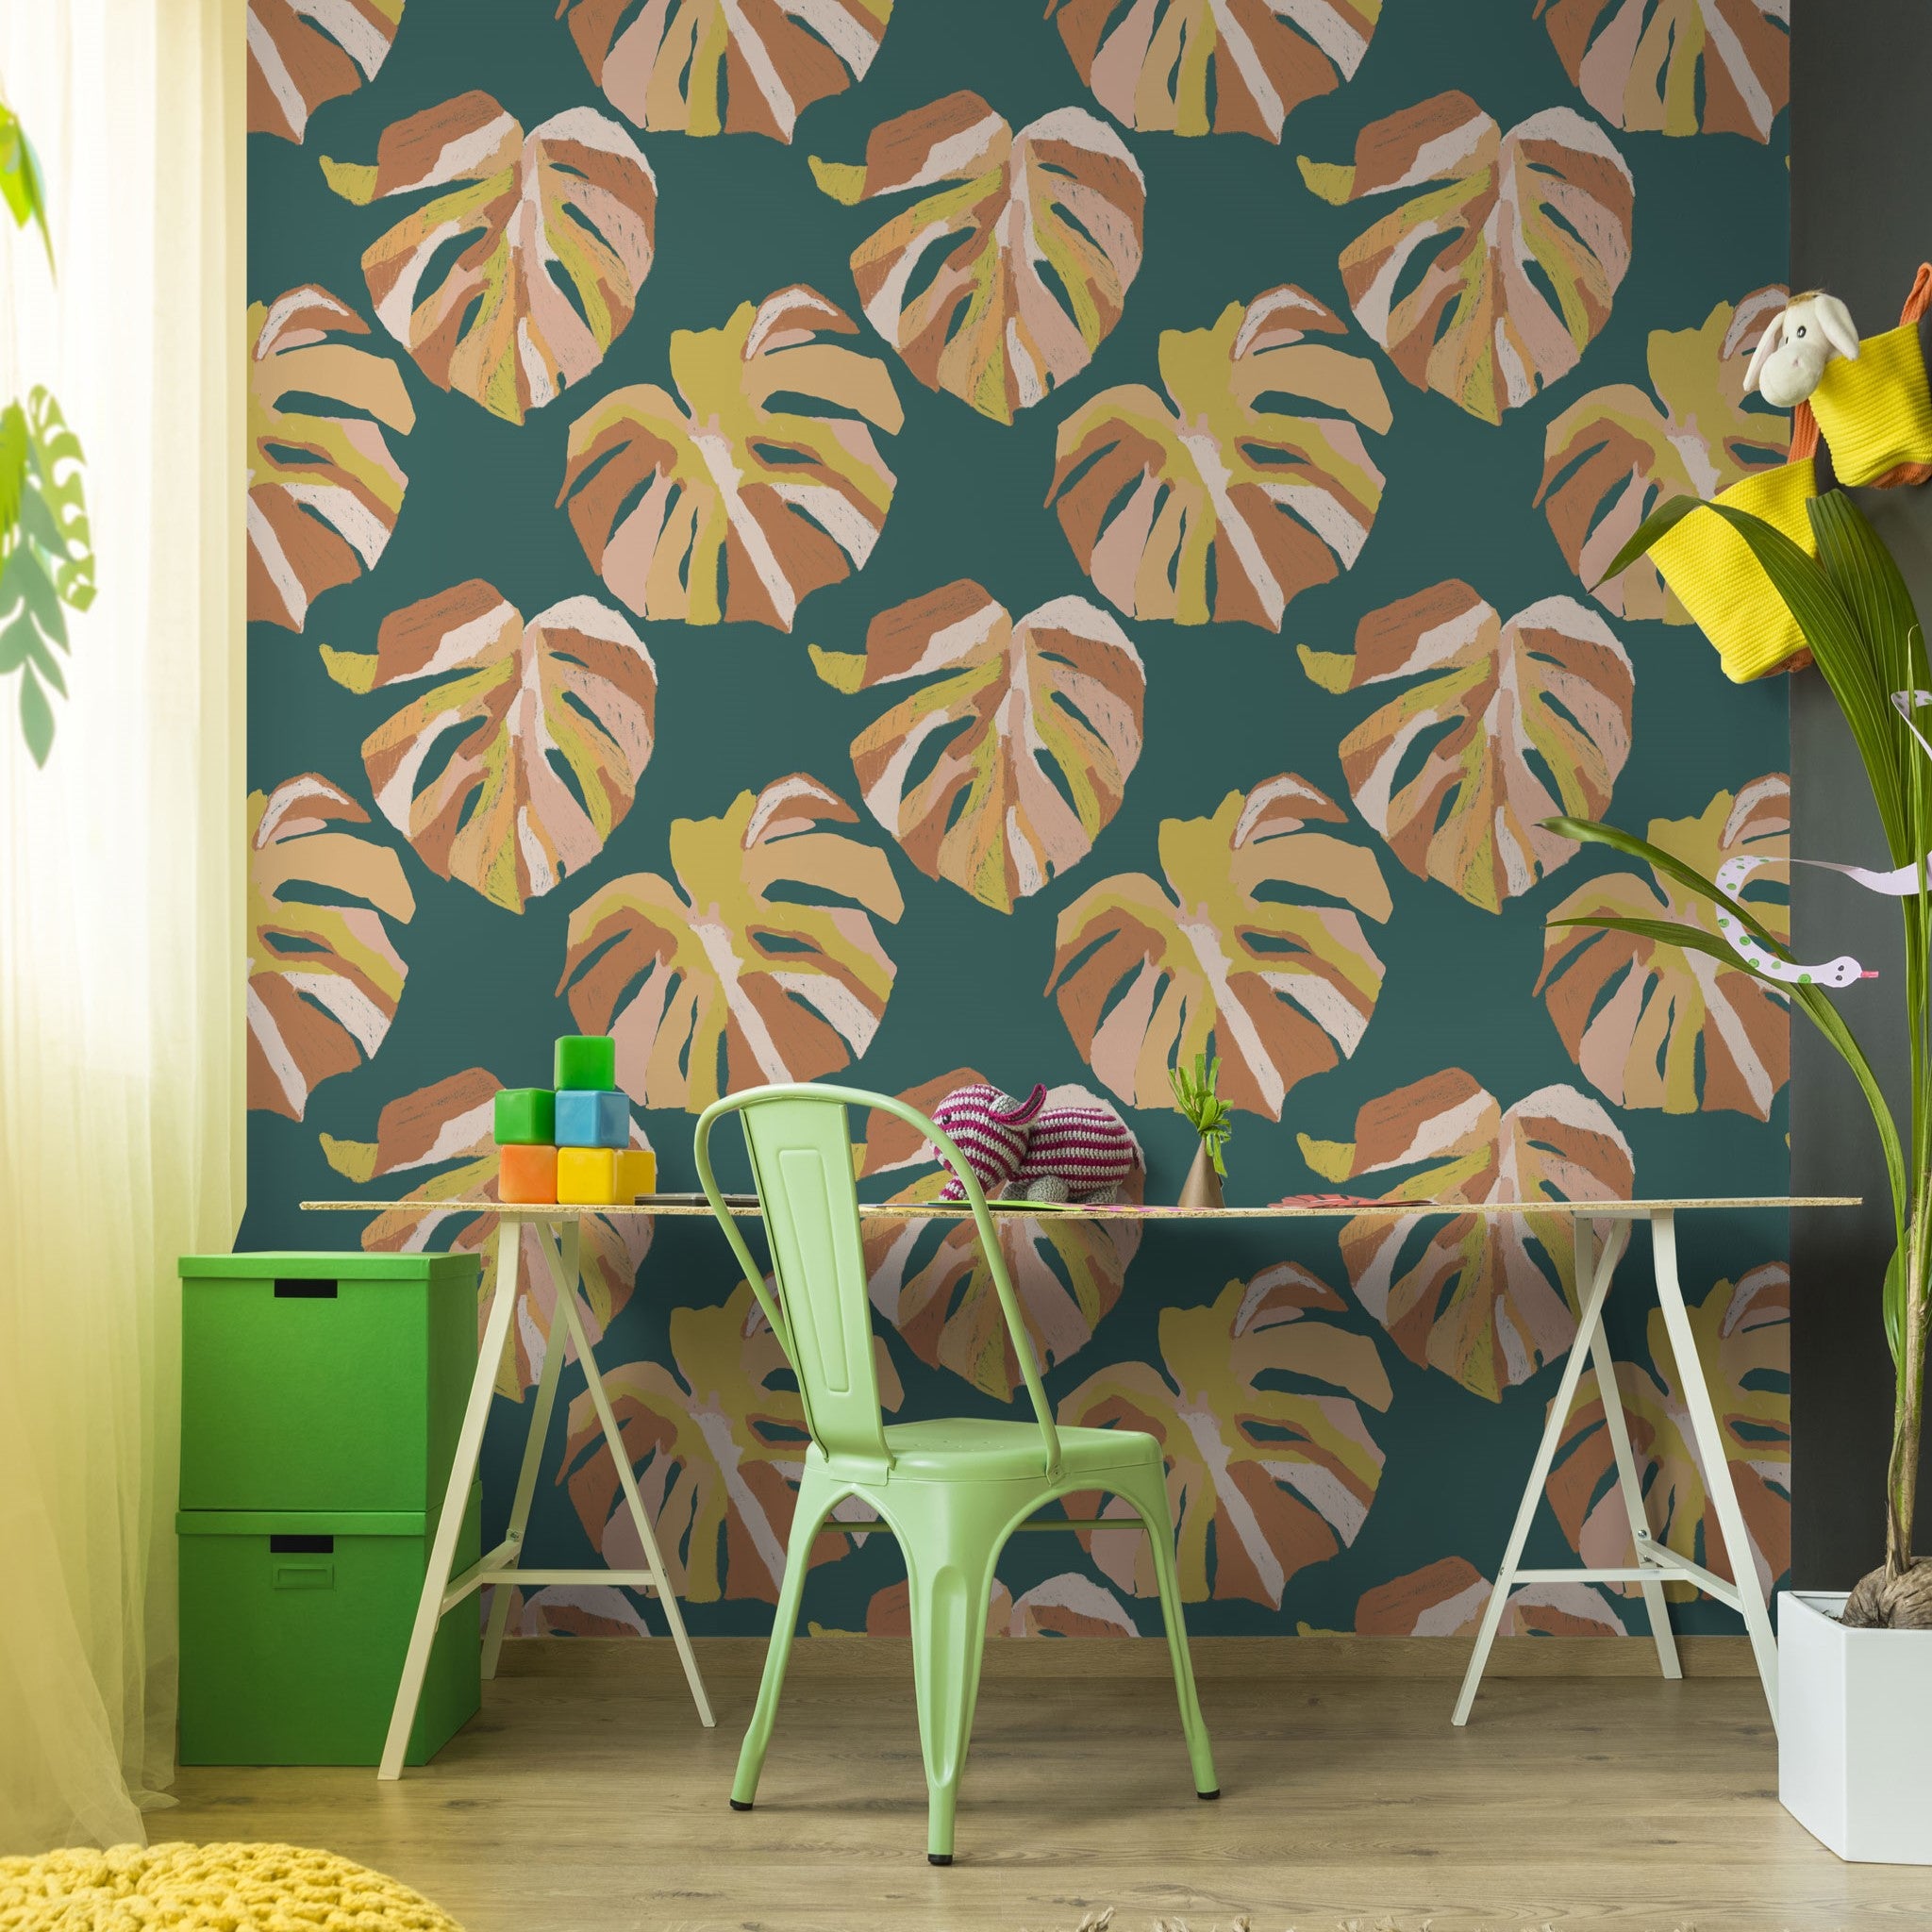 "Wall Blush Monstera Wallpaper in a vibrant home office setting with stylish decor, highlighting green leaf patterns."